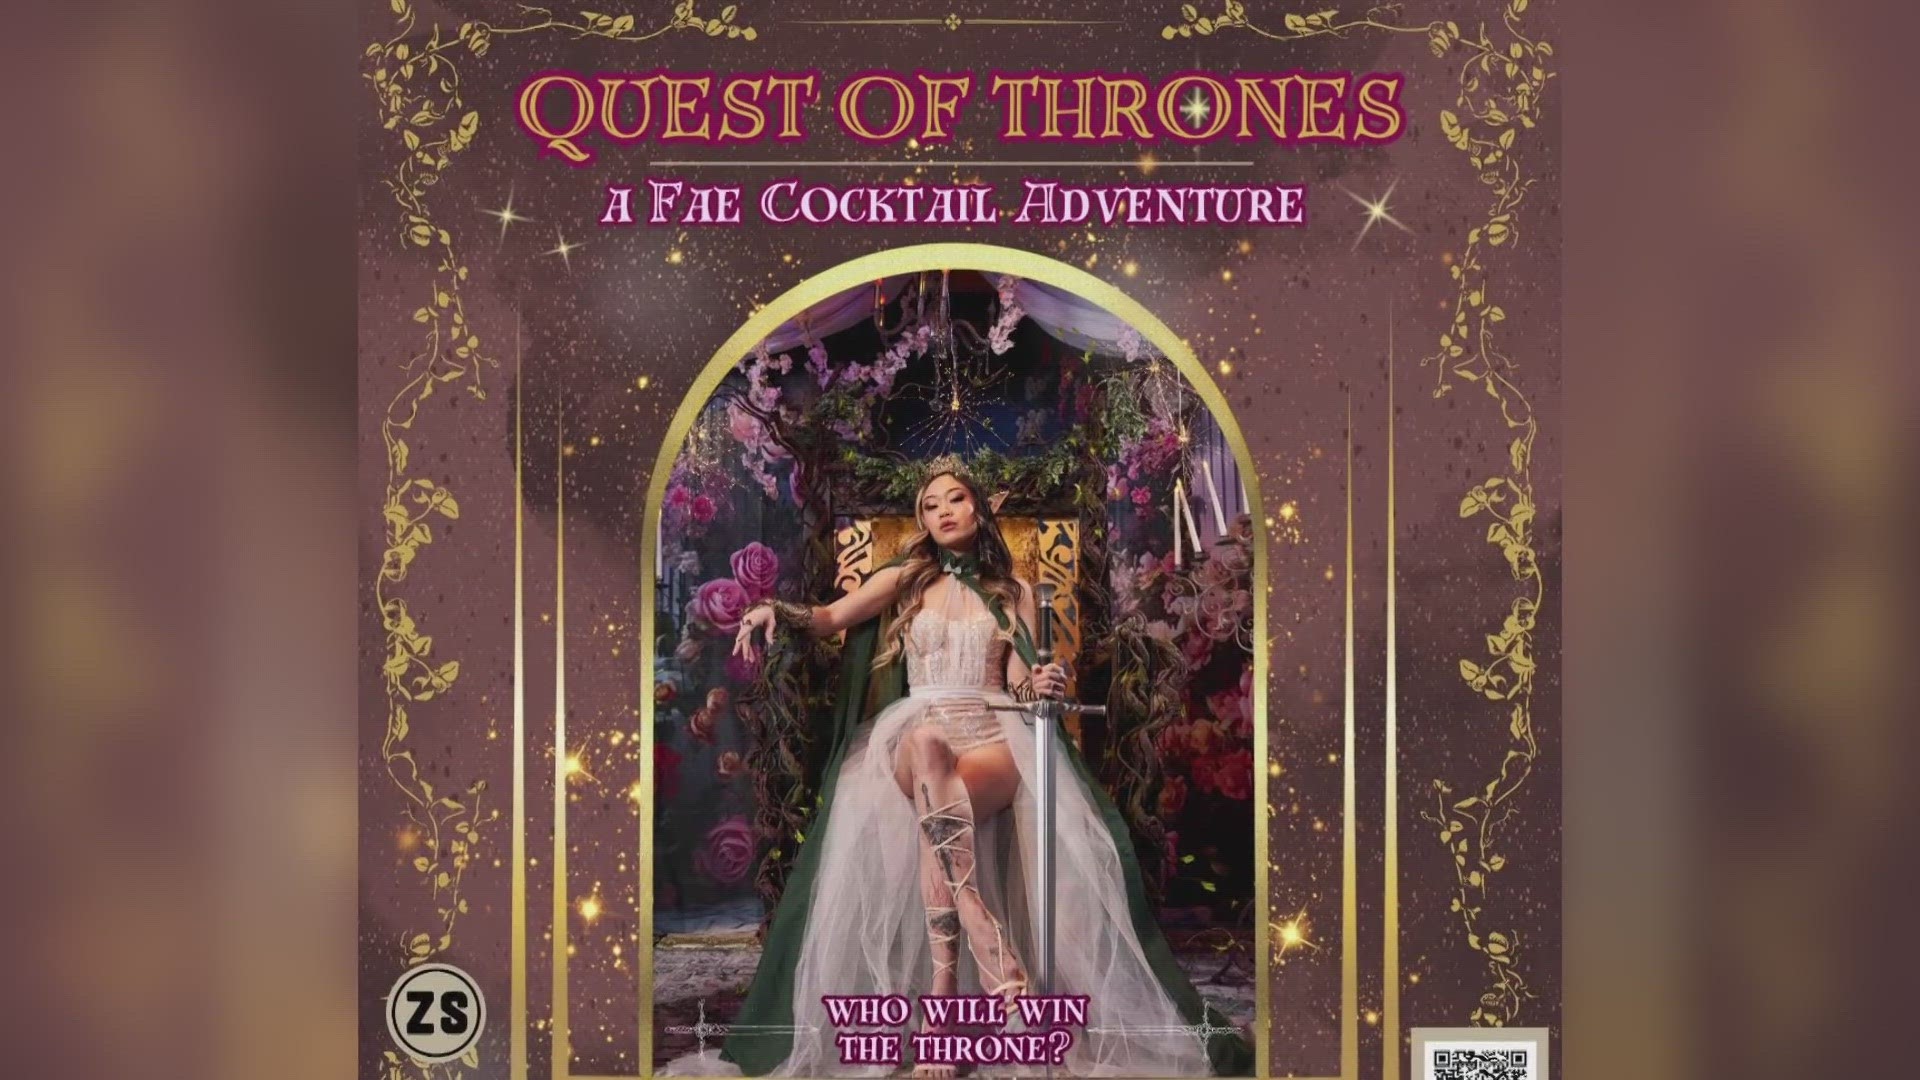 Quest of Thrones: A Fae Cocktail Adventure kicks off Thursday at Zeppelin Station in Denver.